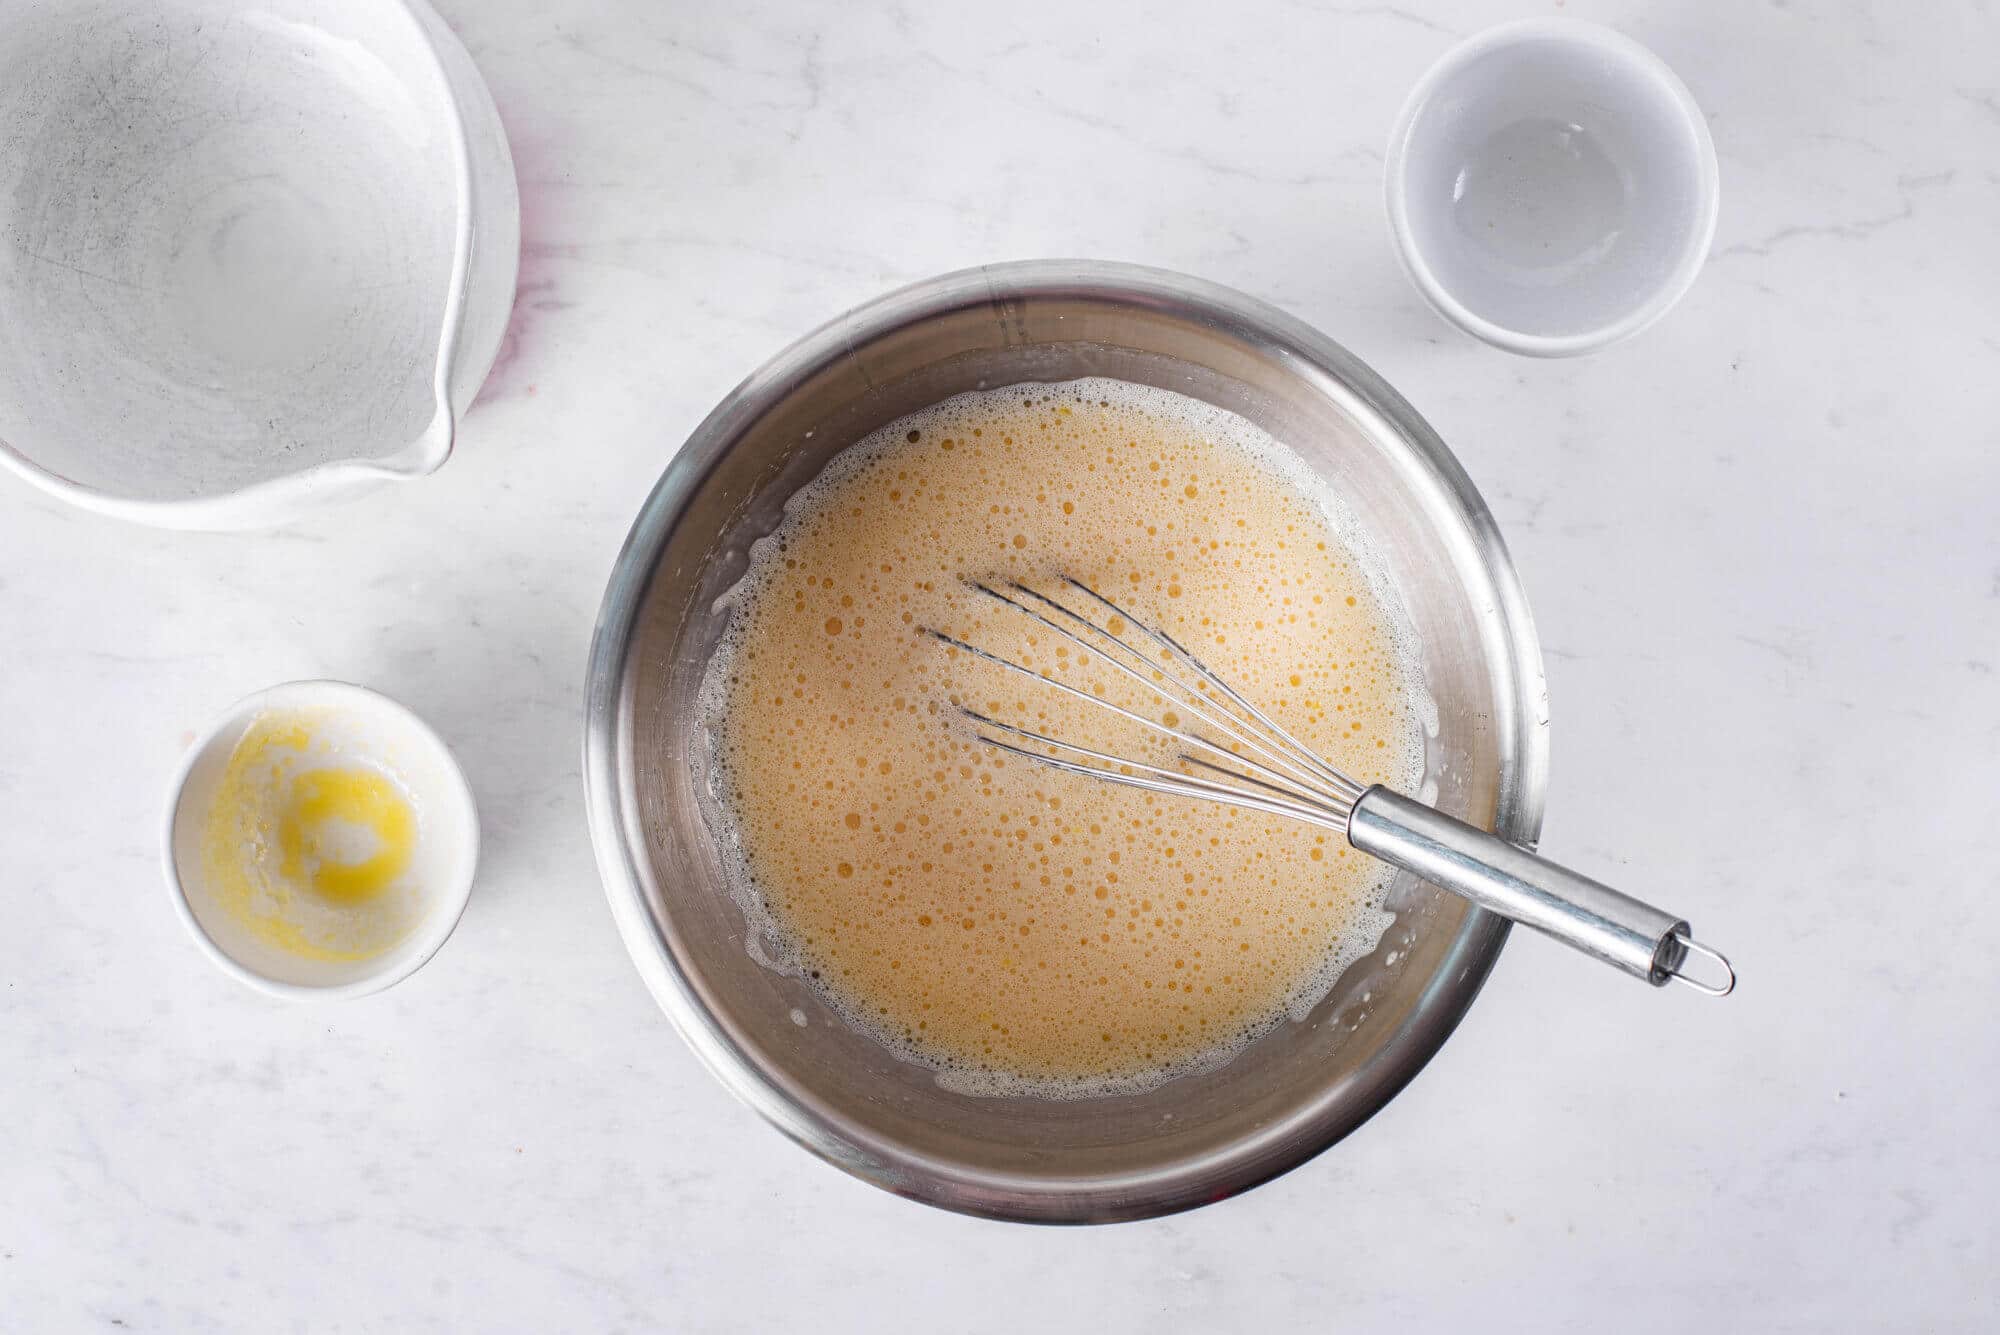 crepes-being-mixed-in-a-silver-bowl-with-a-whisk-and-bowls-on-the-side